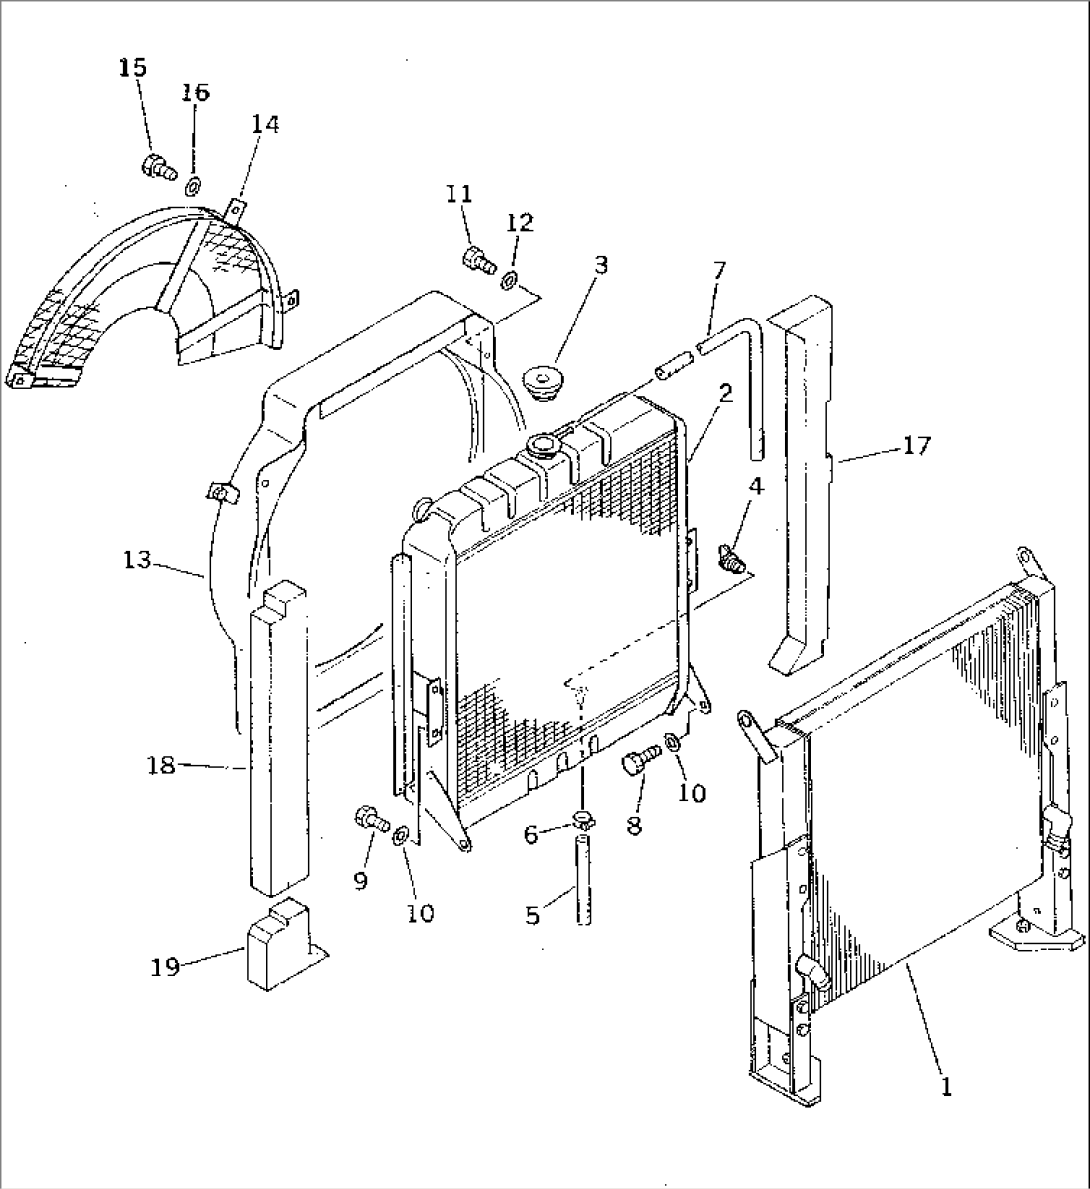 RADIATOR AND OIL COOLER(#1601-1861)